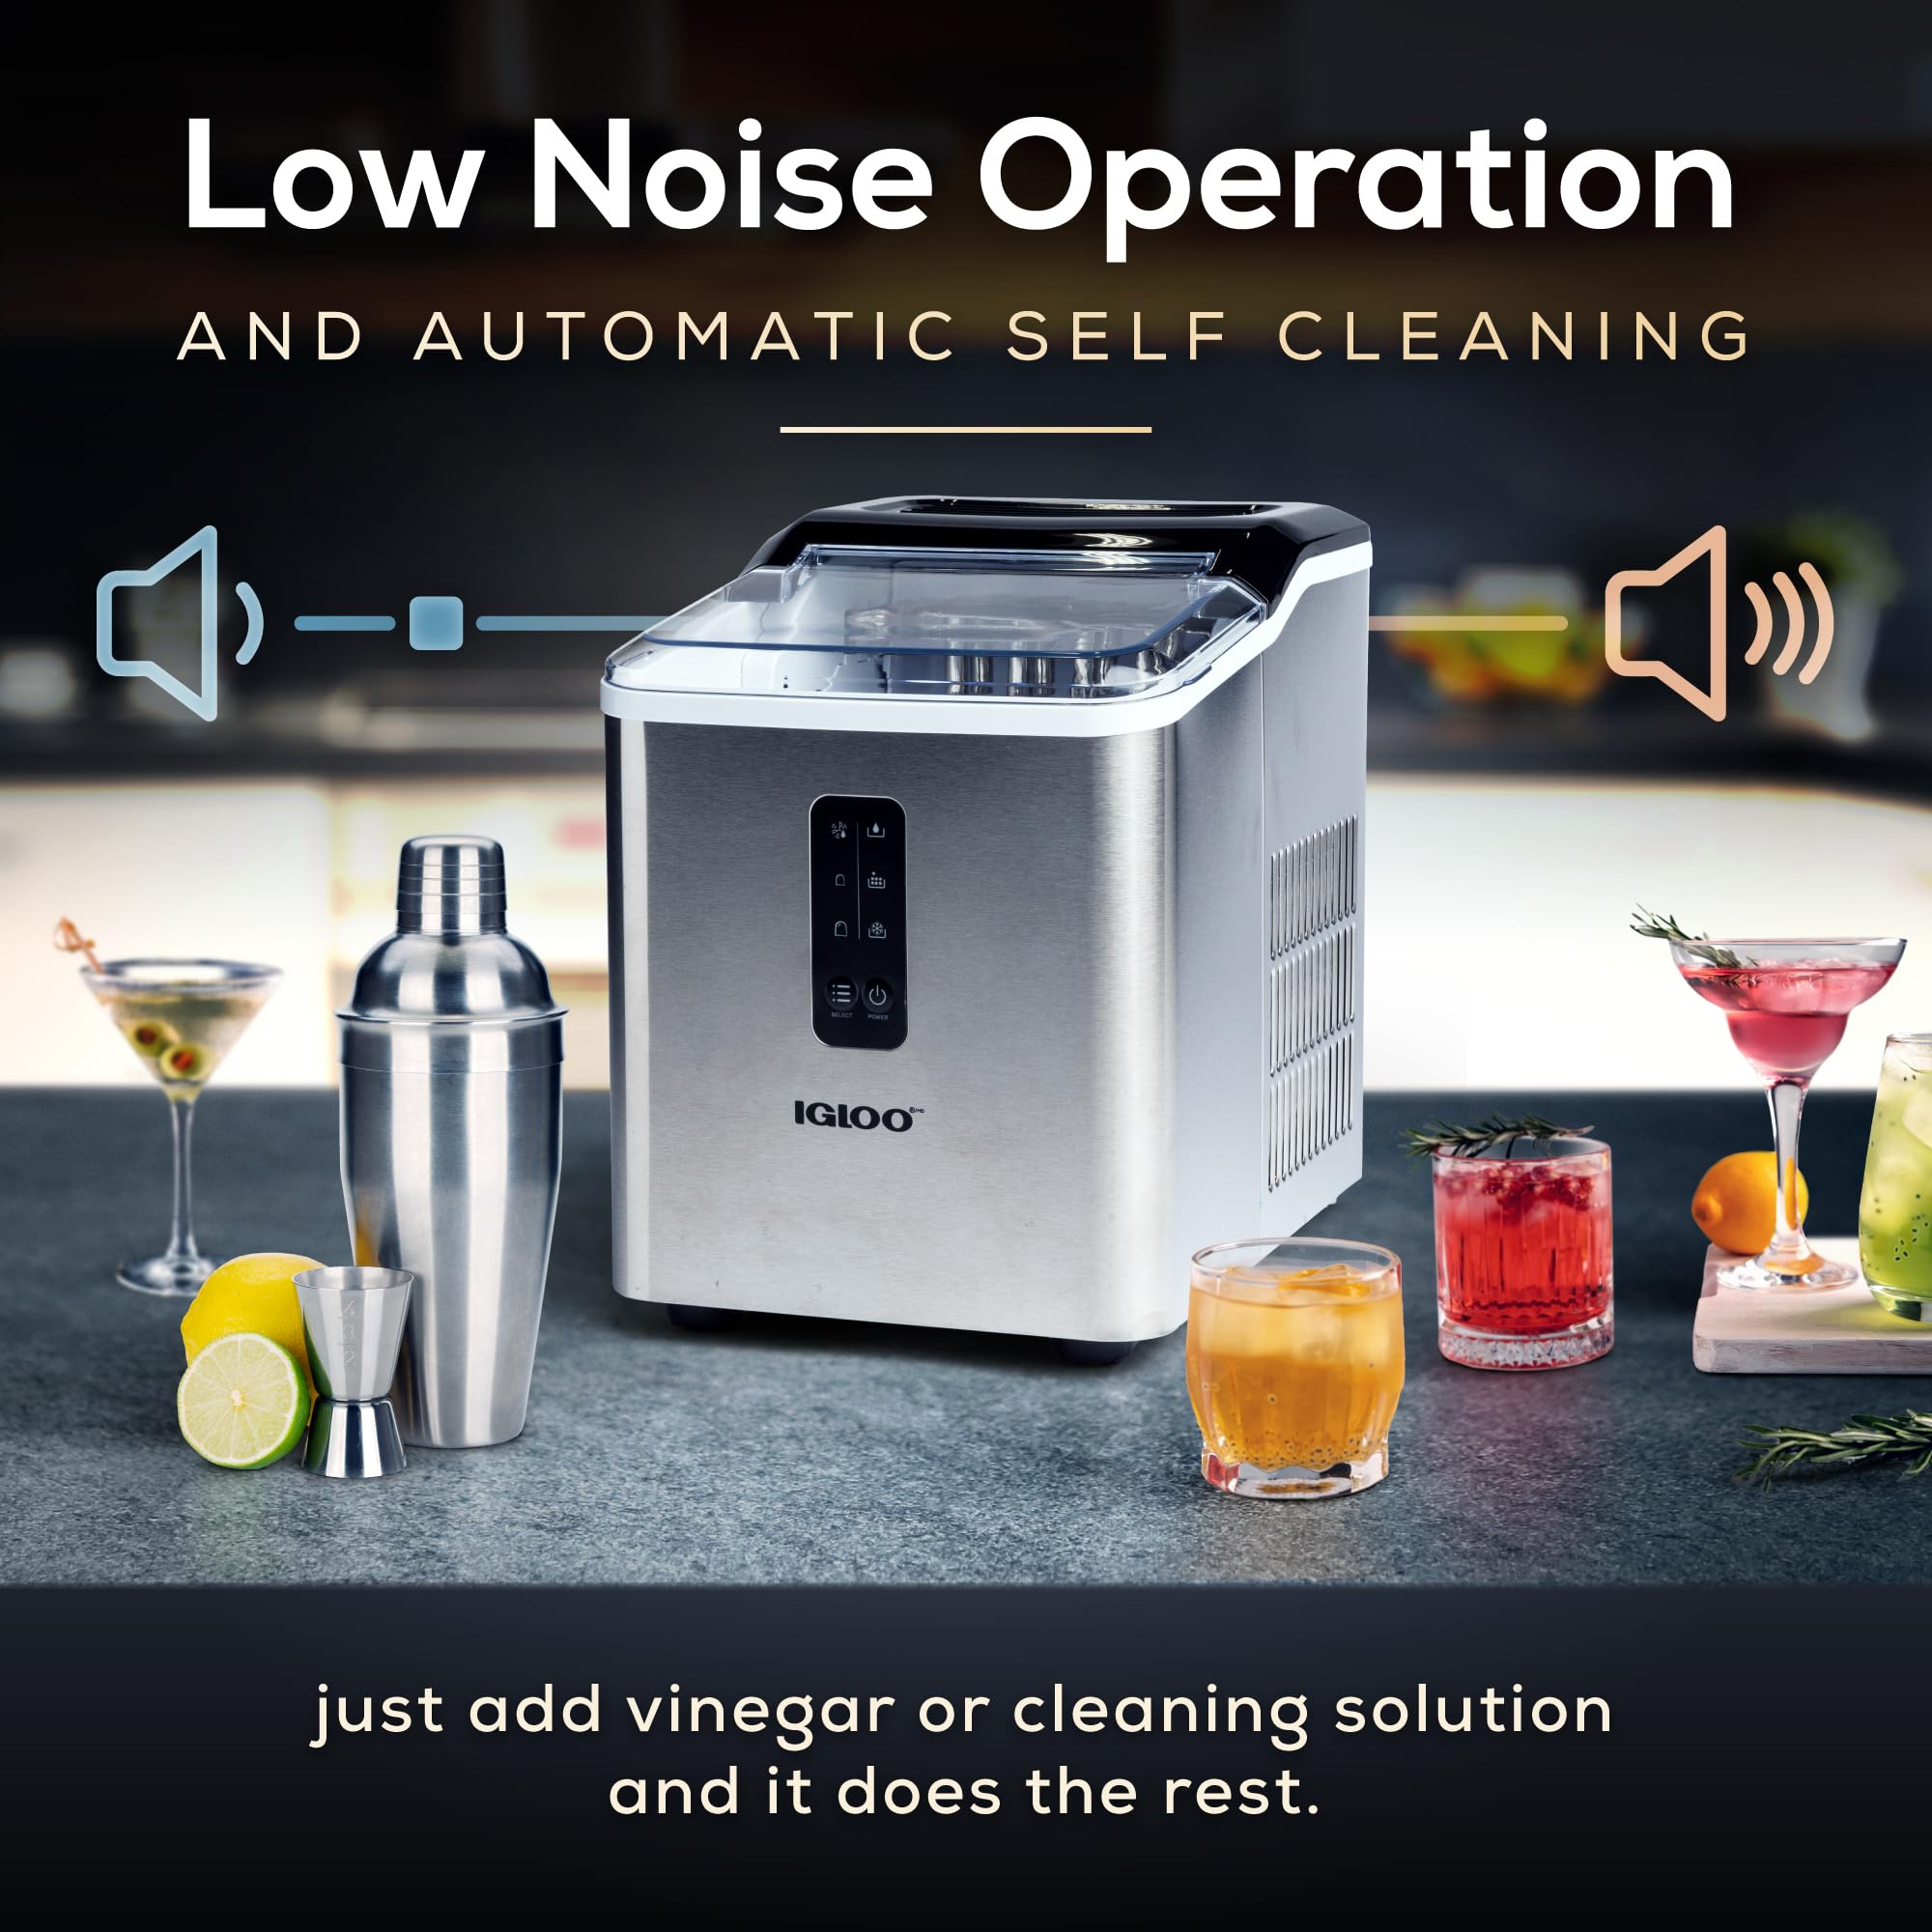 Igloo Automatic Ice Maker, Self- Cleaning, Countertop Size, 26 Pounds in 24 Hours, Cubes 7 Minutes, LED Control Panel, Scoop Included, Perfect for Water Bottles, Mixed Drinks, Stainless Steel